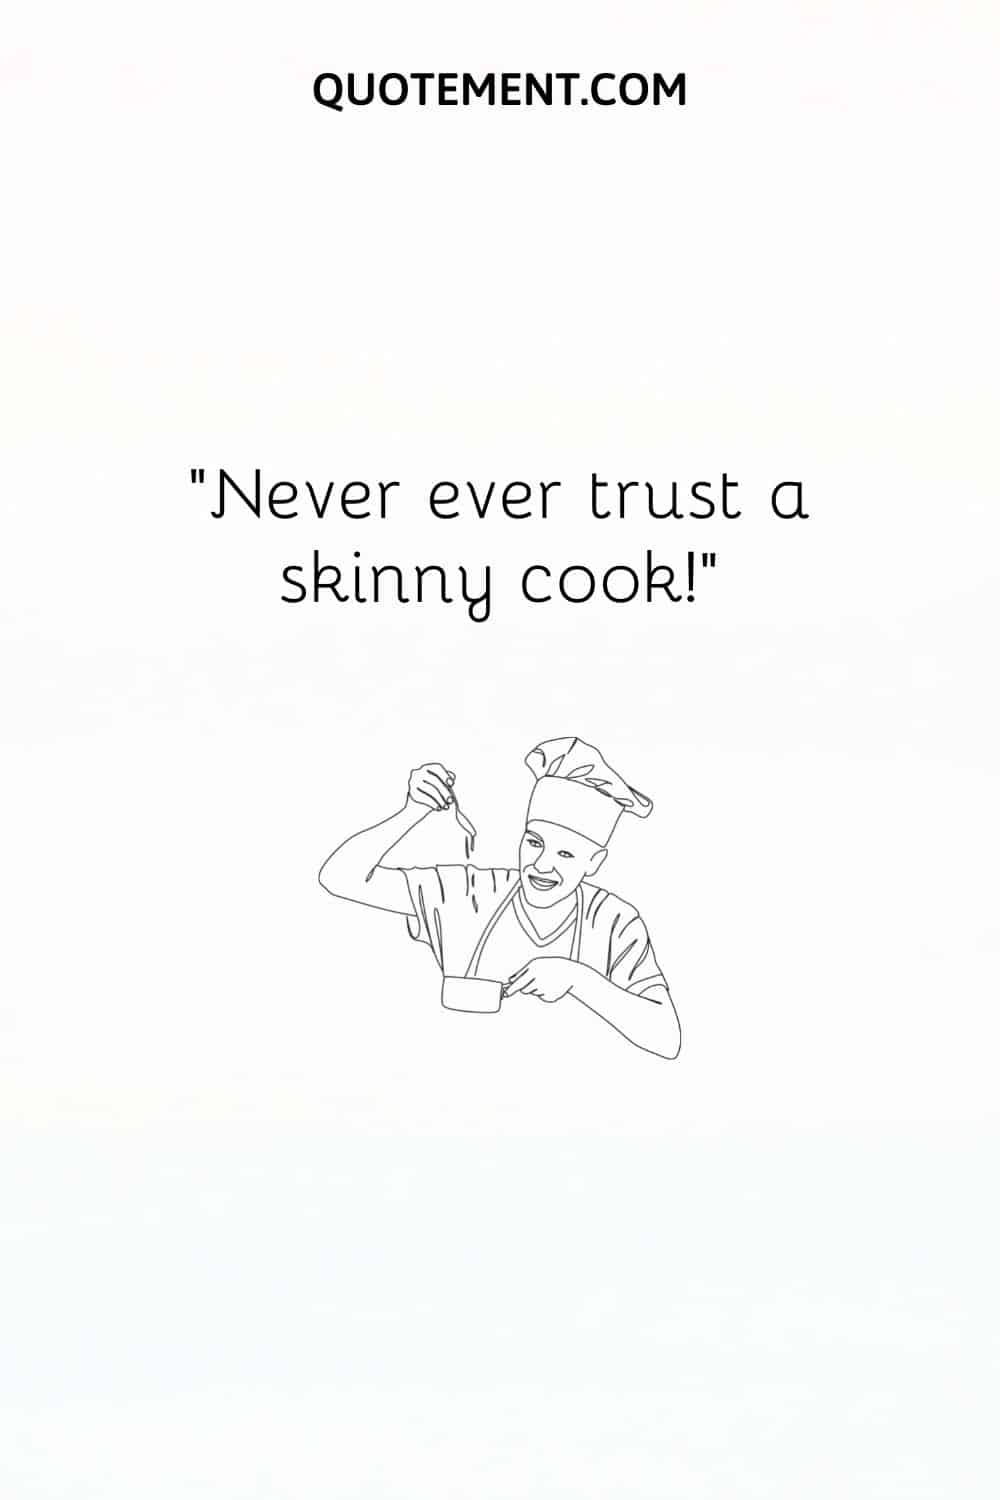 Never ever trust a skinny cook